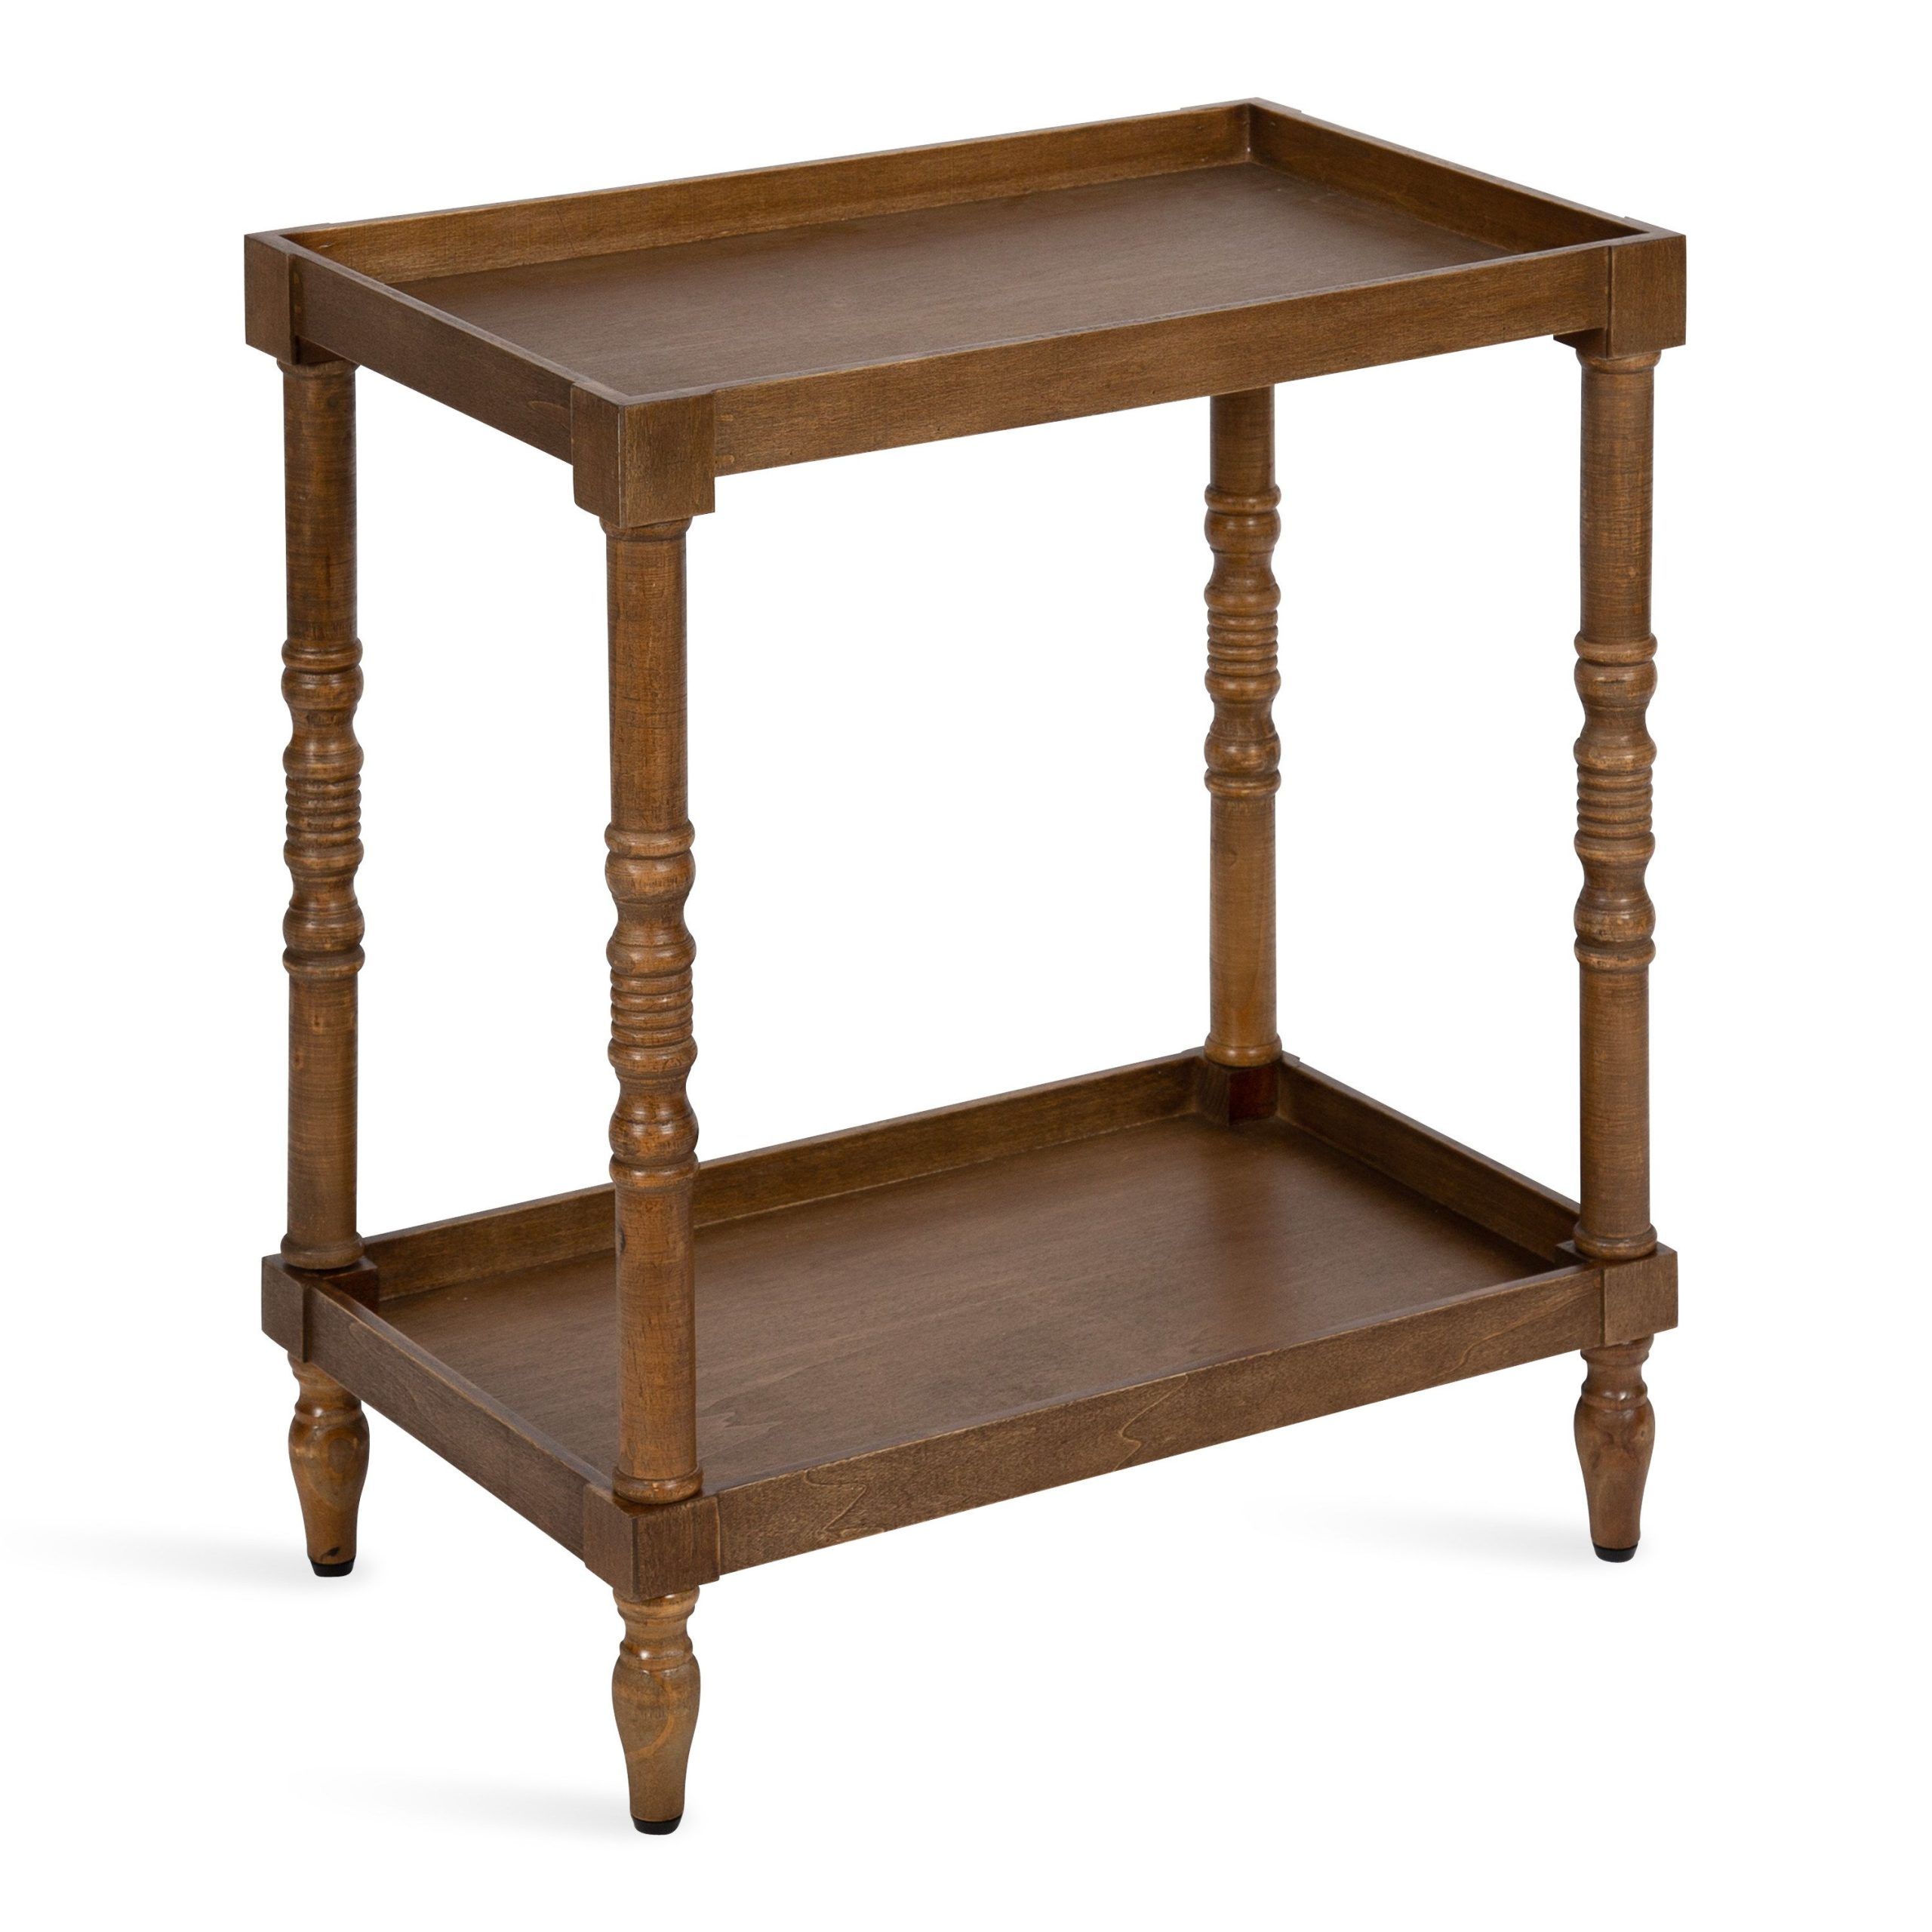 Kate And Laurel Bellport Farmhouse Side Table, 22 X 14 X 26, Rustic Regarding Kate And Laurel Bellport Farmhouse Drink Tables (Gallery 11 of 20)